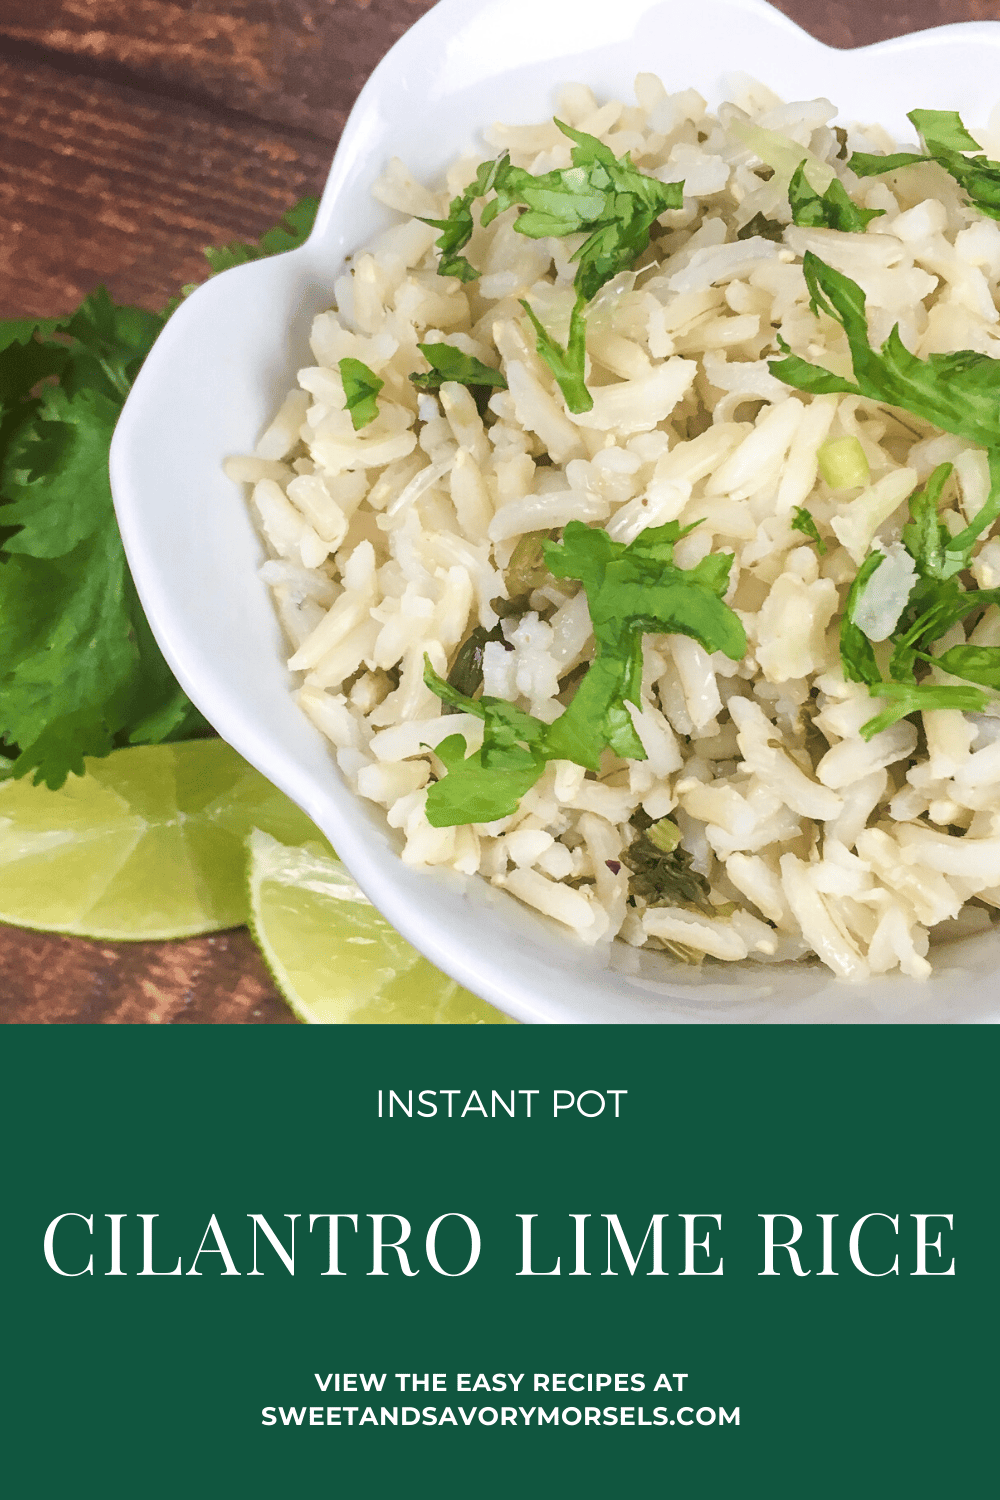 Brown rice seasoned with fresh lime juice, lime zest, garlic, and cilantro creates an outstandingly delicious side dish in this Cilantro Lime Rice recipe!